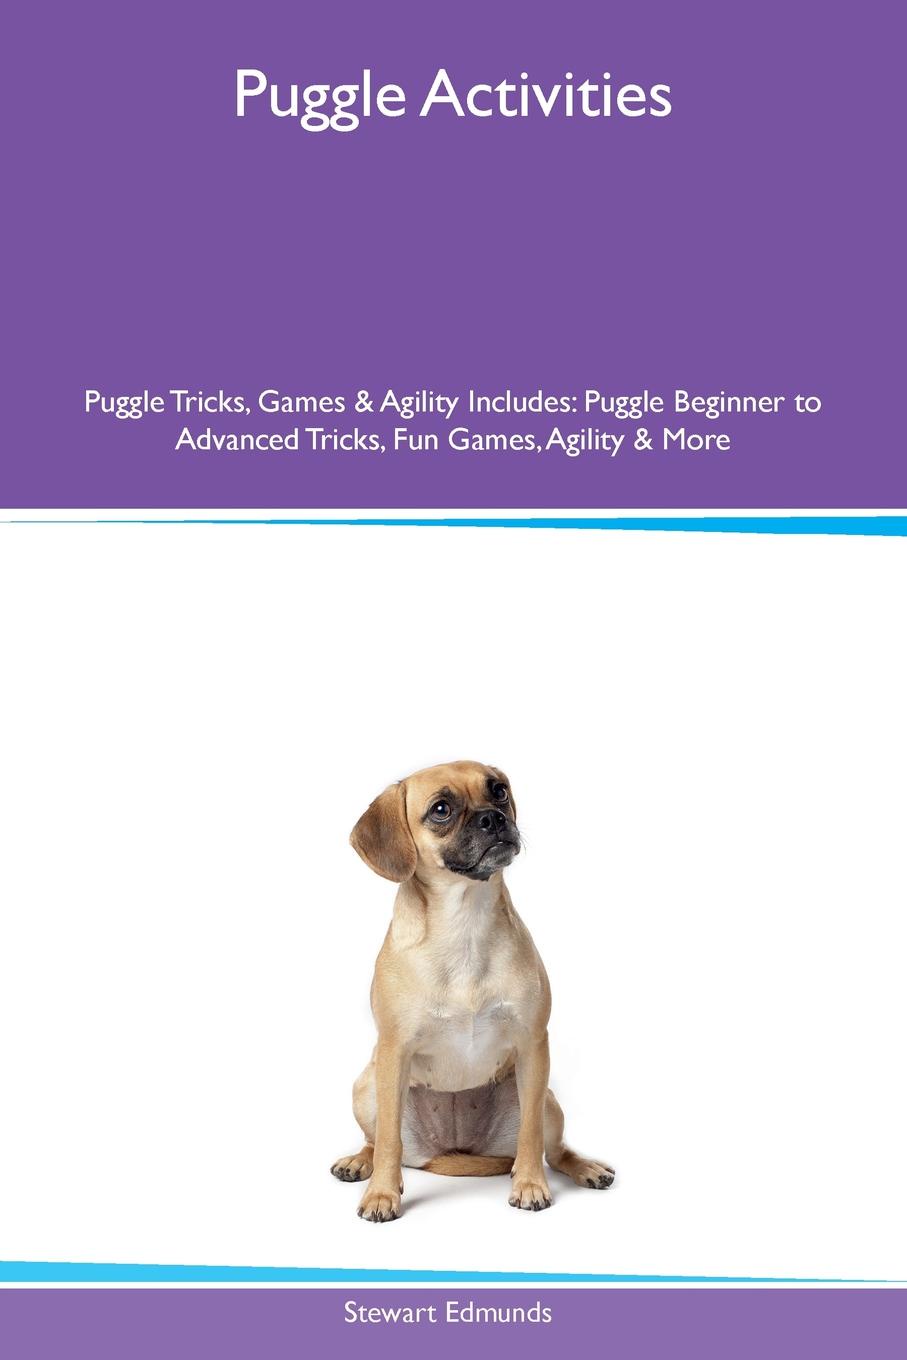 Puggle Activities Puggle Tricks, Games & Agility Includes. Puggle Beginner to Advanced Tricks, Fun Games, Agility & More